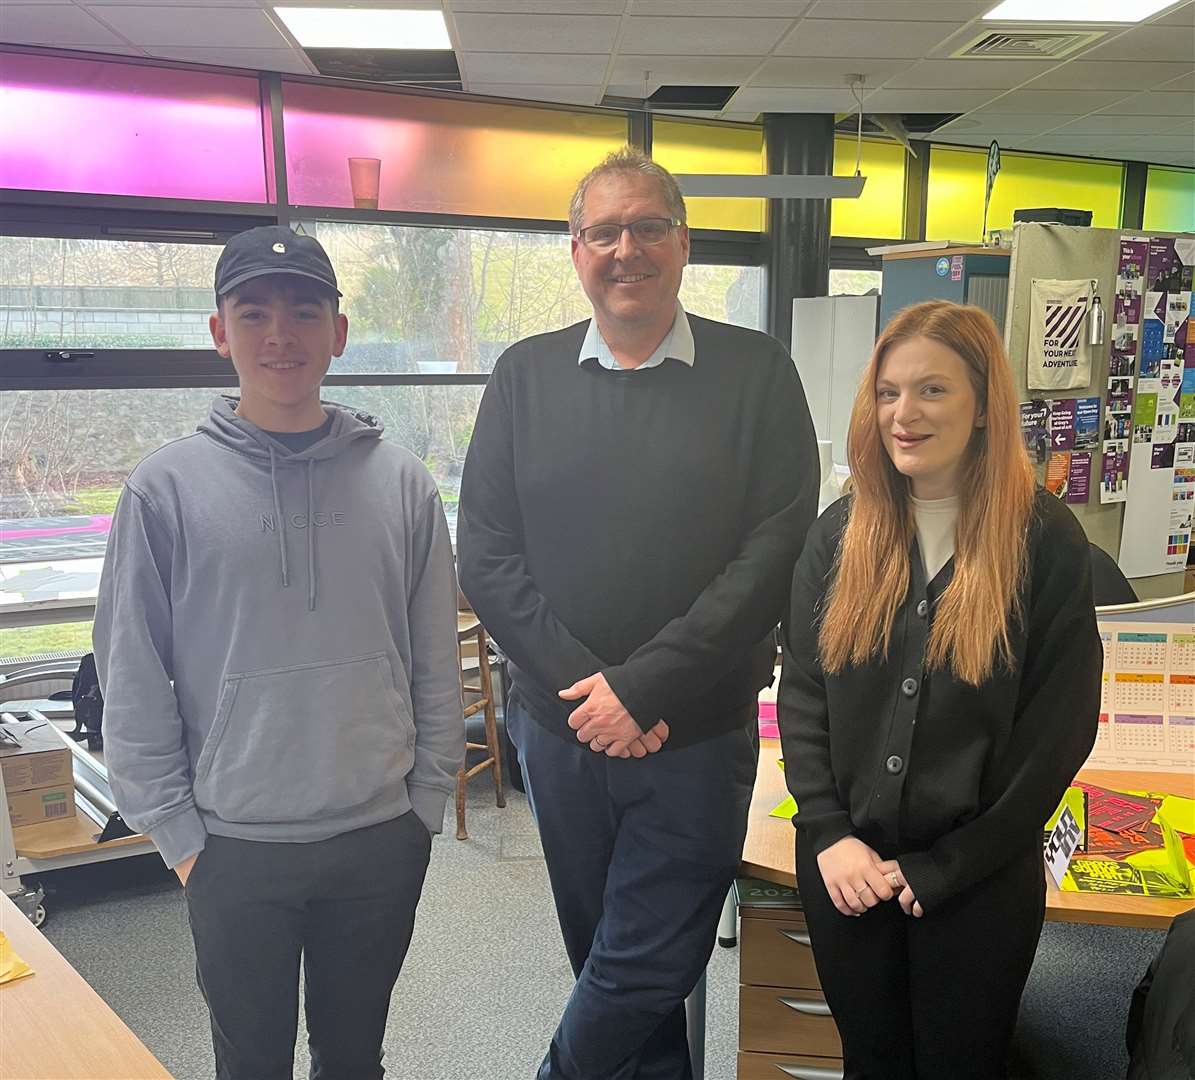 Fourth year Communication Design students Ollie Serle and Bronwen Farquhar with Dean of Gray’s School of Art Dan Allen.